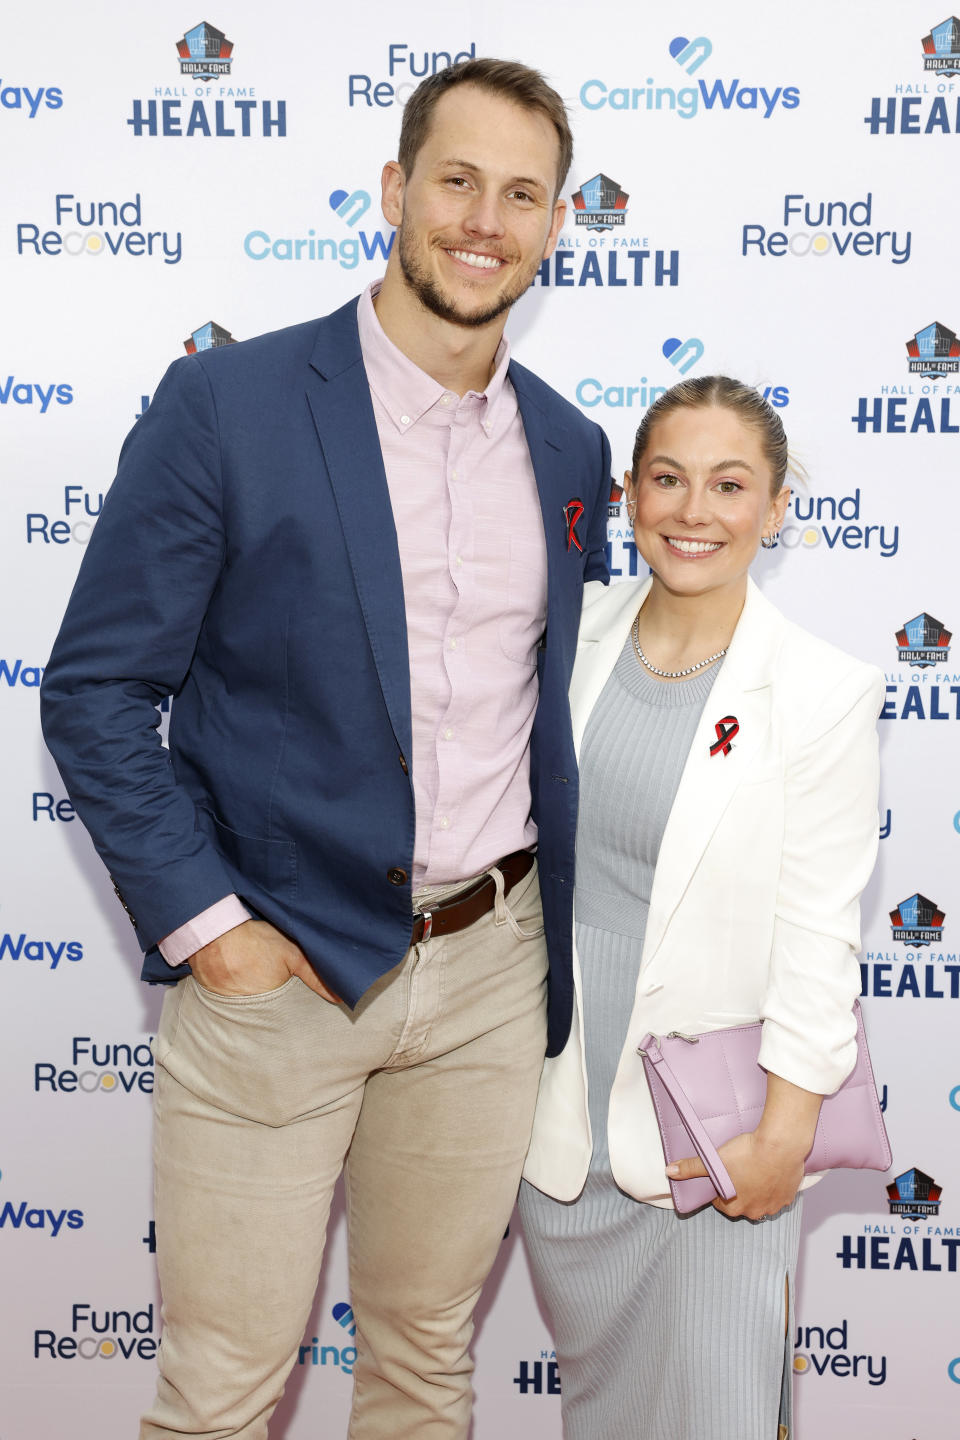 NASHVILLE, TENNESSEE - APRIL 04: (L-R) Andrew East and Shawn Johnson East, wearing The Covenant School ribbon, attend the Pro Football Hall Of Fame's Family Recovery Fund charity concert and dinner with proceeds benefiting the Covenant School held at The Twelve Thirty Club on April 04, 2023 in Nashville, Tennessee. (Photo by Jason Kempin/Getty Images)